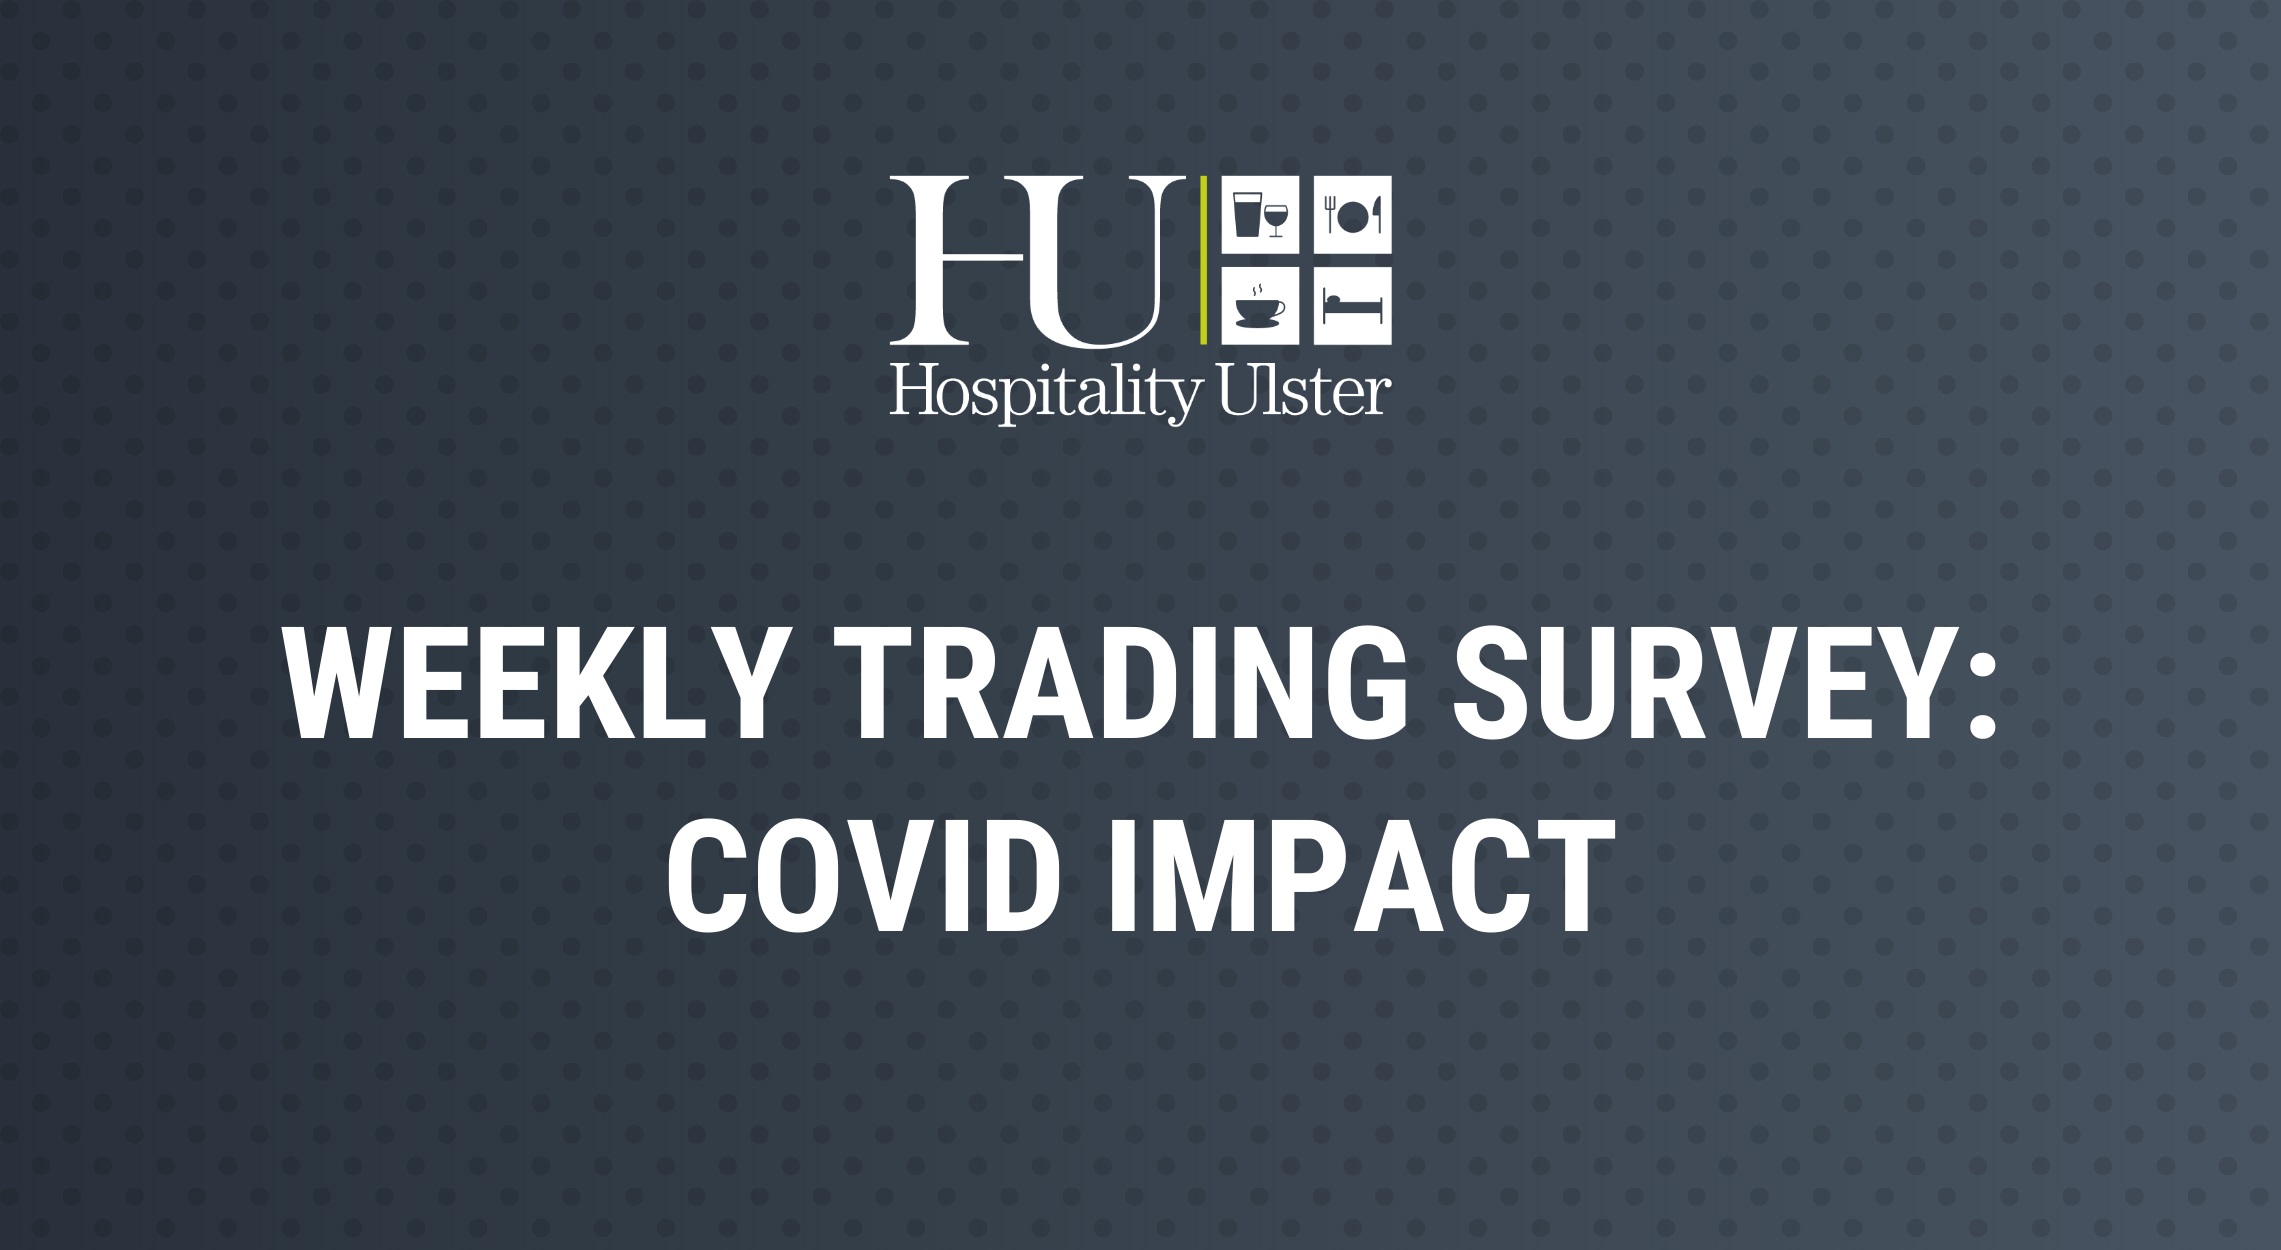 WEEKLY TRADING SURVEY - COVID IMPACT WC 6 DEC TO 12 DEC 21